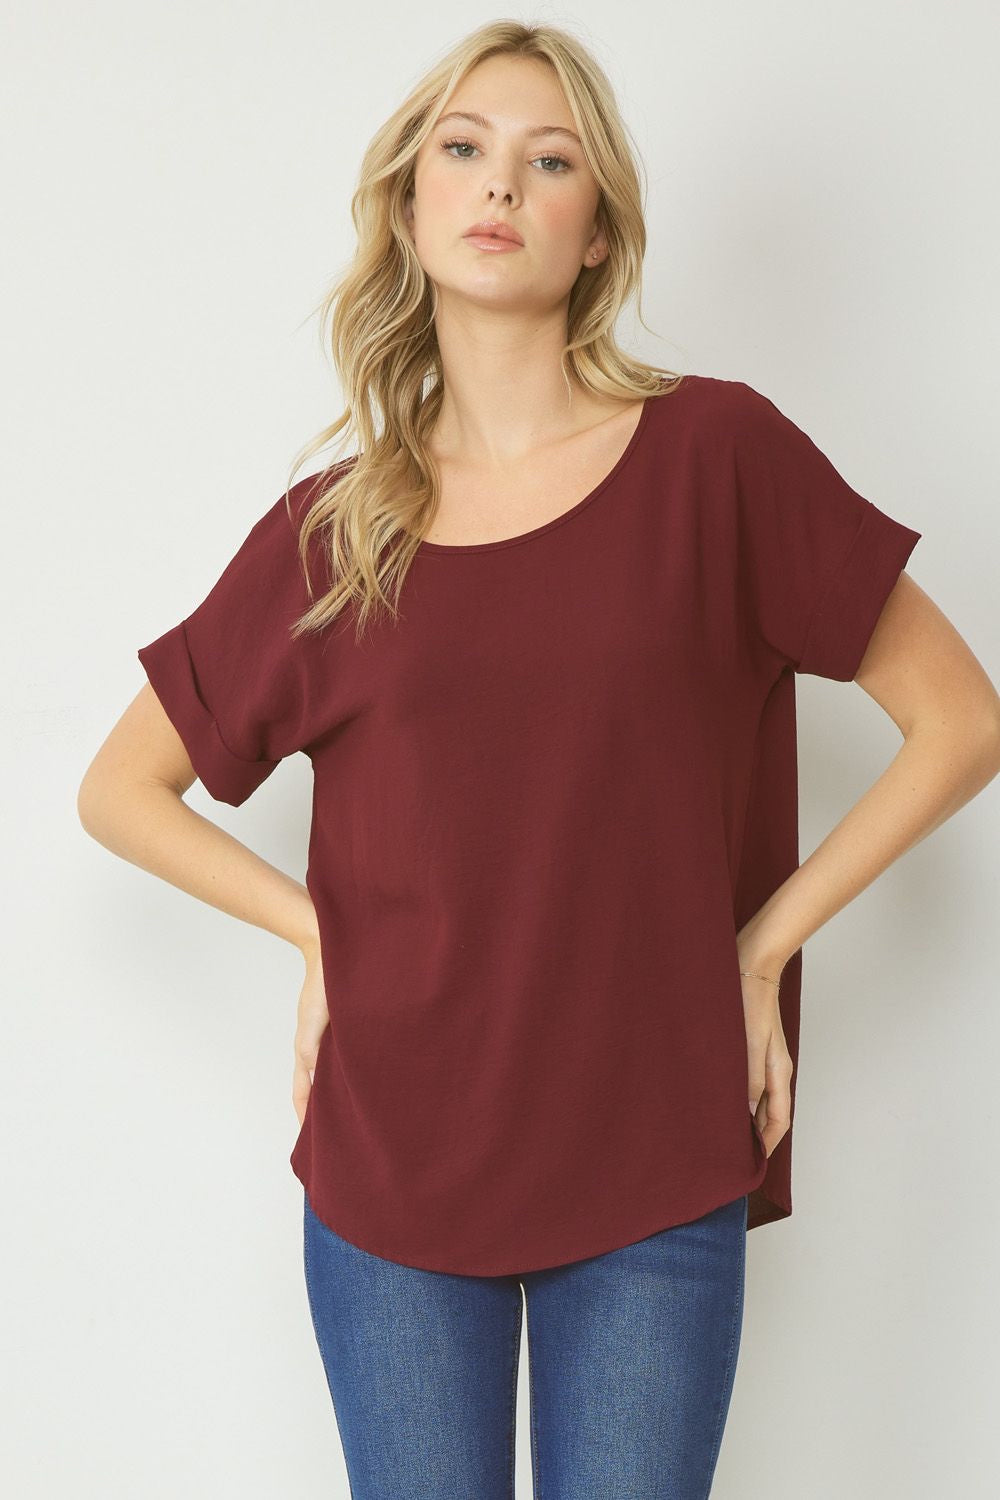 Burgundy scoop-neck top featuring permanent rolled sleeve detail and an asymmetrical hem.